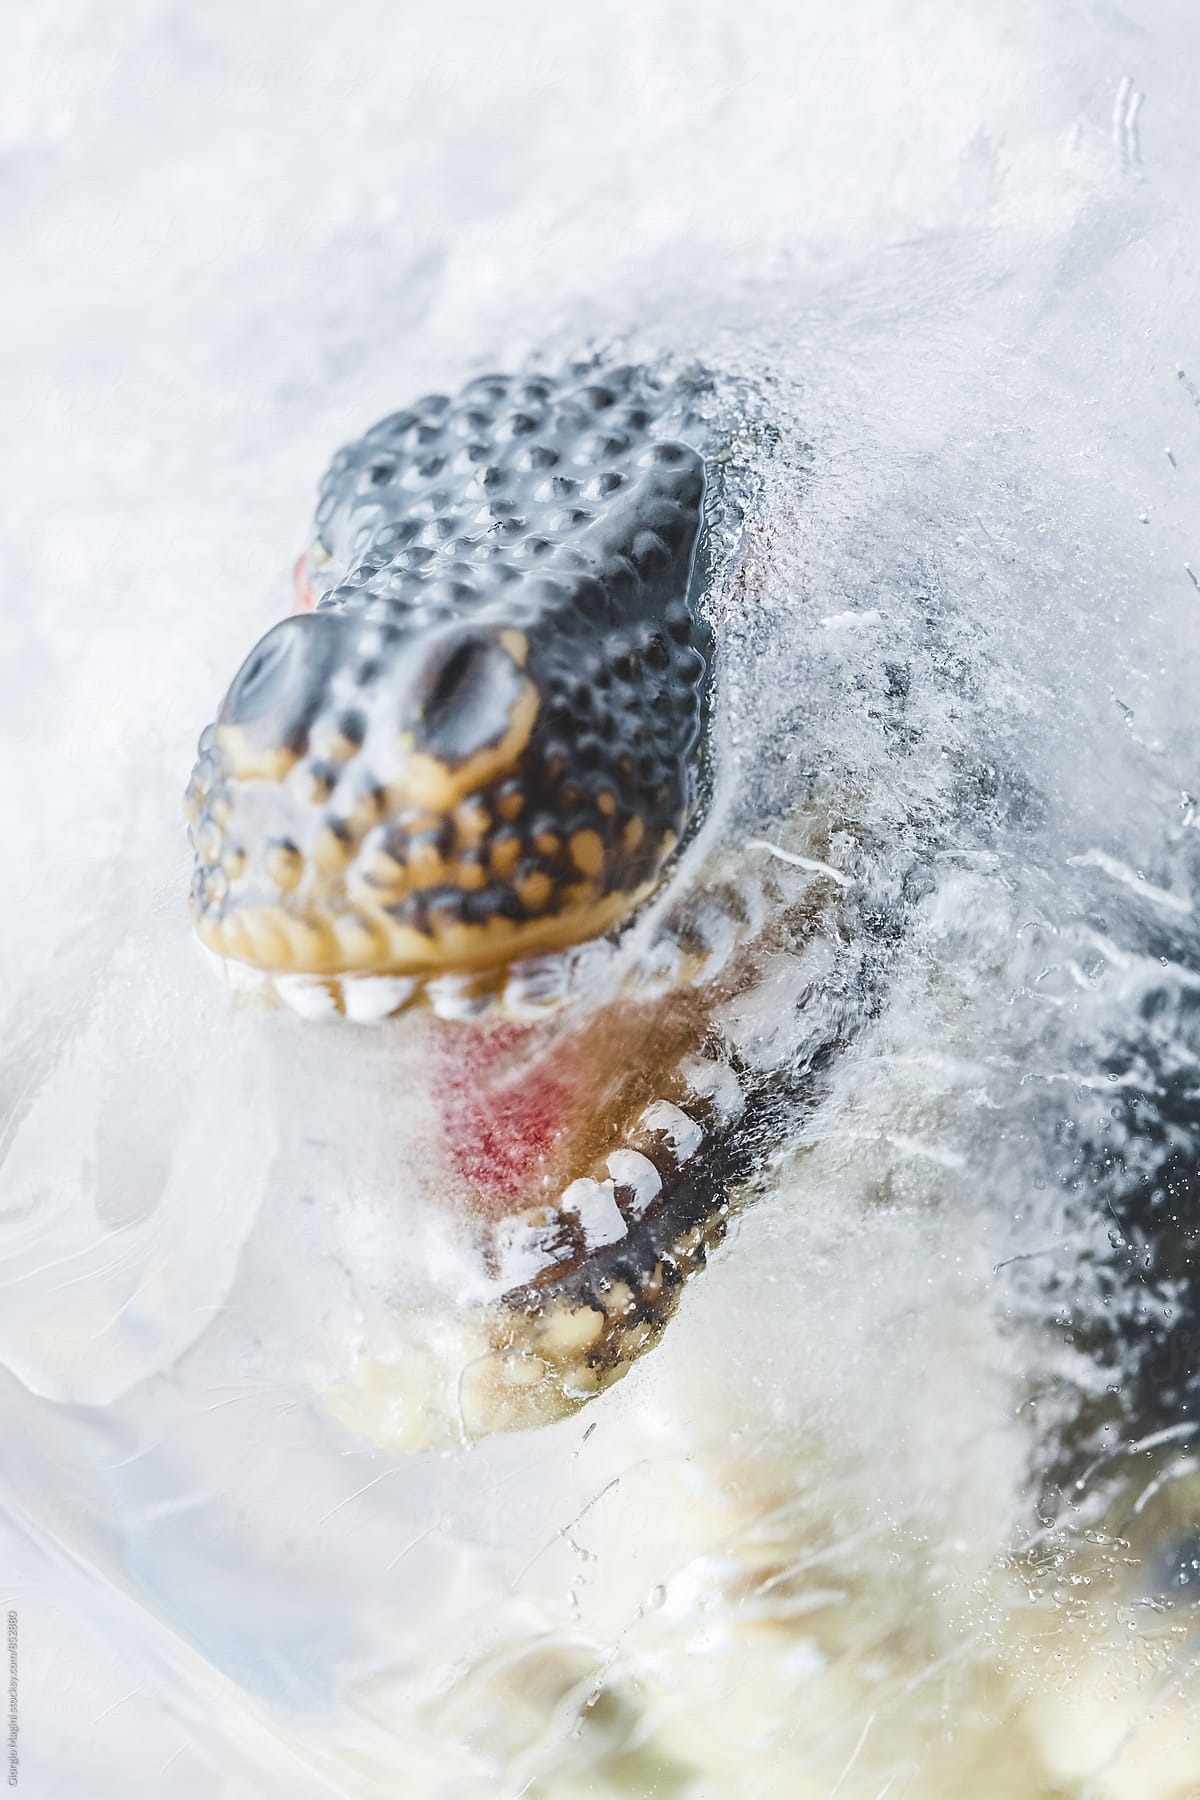 Dinosaur Toy in a Block of Ice